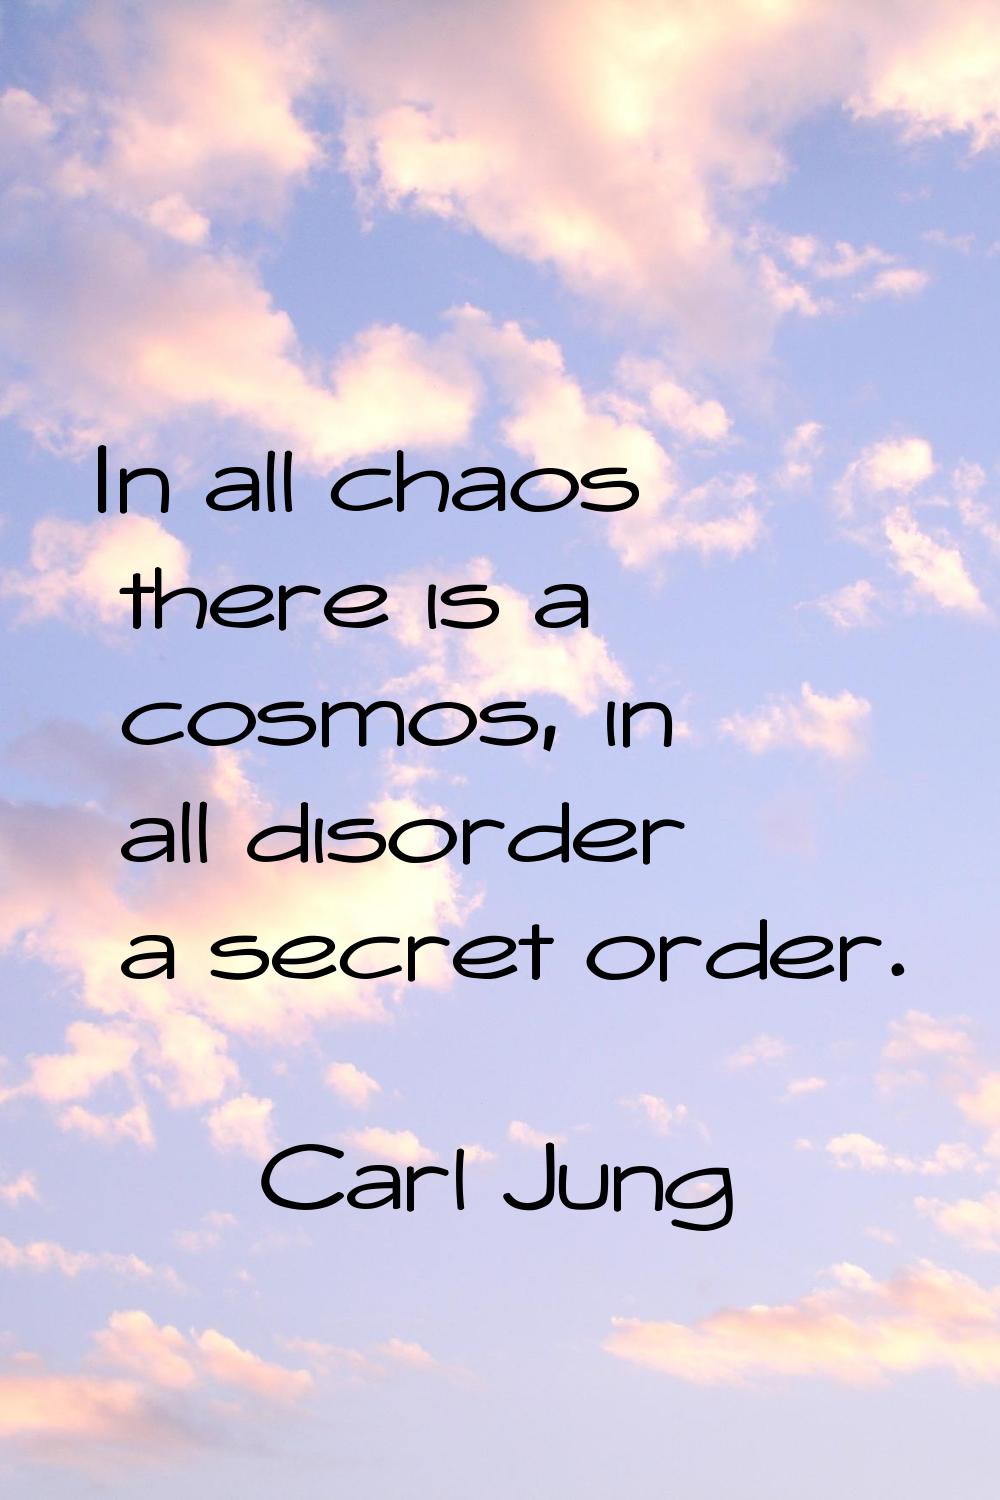 In all chaos there is a cosmos, in all disorder a secret order.